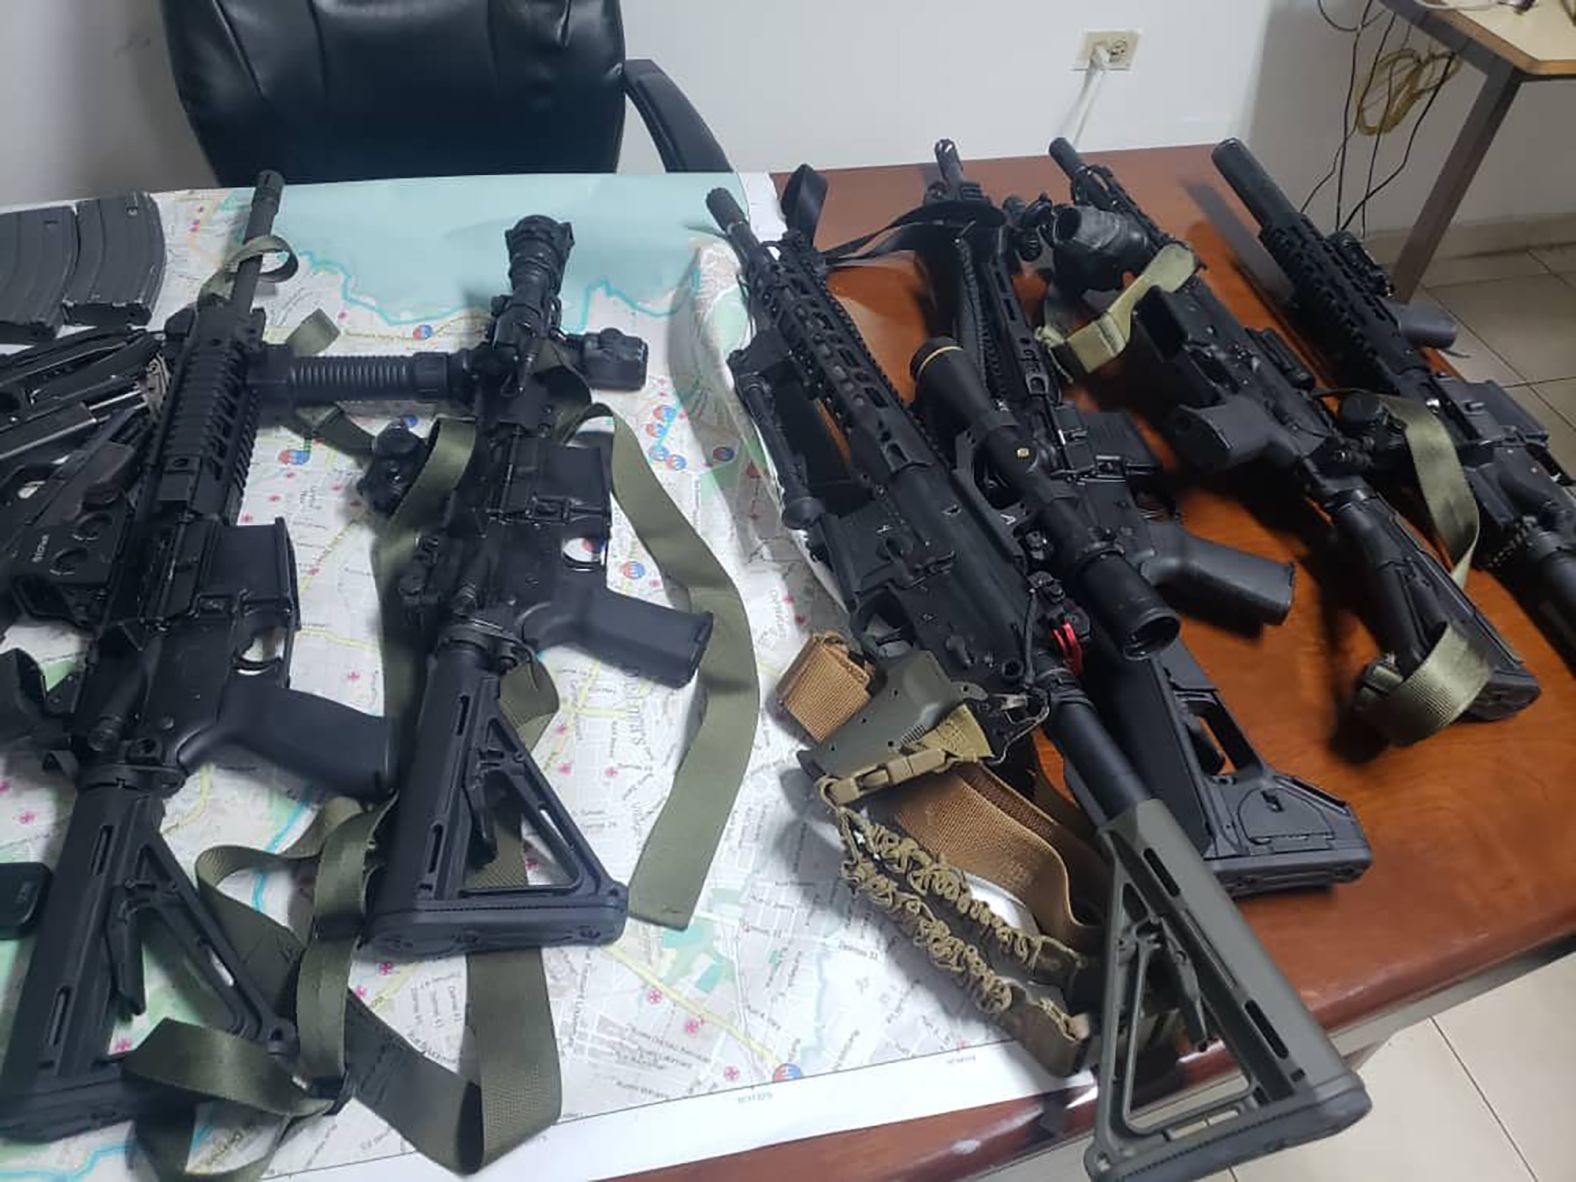 Haitian Police Chief Michel-Ange Gédéon told CNN that eight individuals, including five Americans, are being held for what he described as possession of illegal weapons. Haitian Prime Minister Jean-Henry Ceant <a href="index.php?page=&url=https%3A%2F%2Fwww.cnn.com%2F2019%2F02%2F20%2Famericas%2Fhaiti-detainees-prime-minister-allegation-intl%2Findex.html" target="_blank">has accused them</a> of being "terrorists" on a mission to destabilize his government. CNN was not permitted to speak to the men in detention.